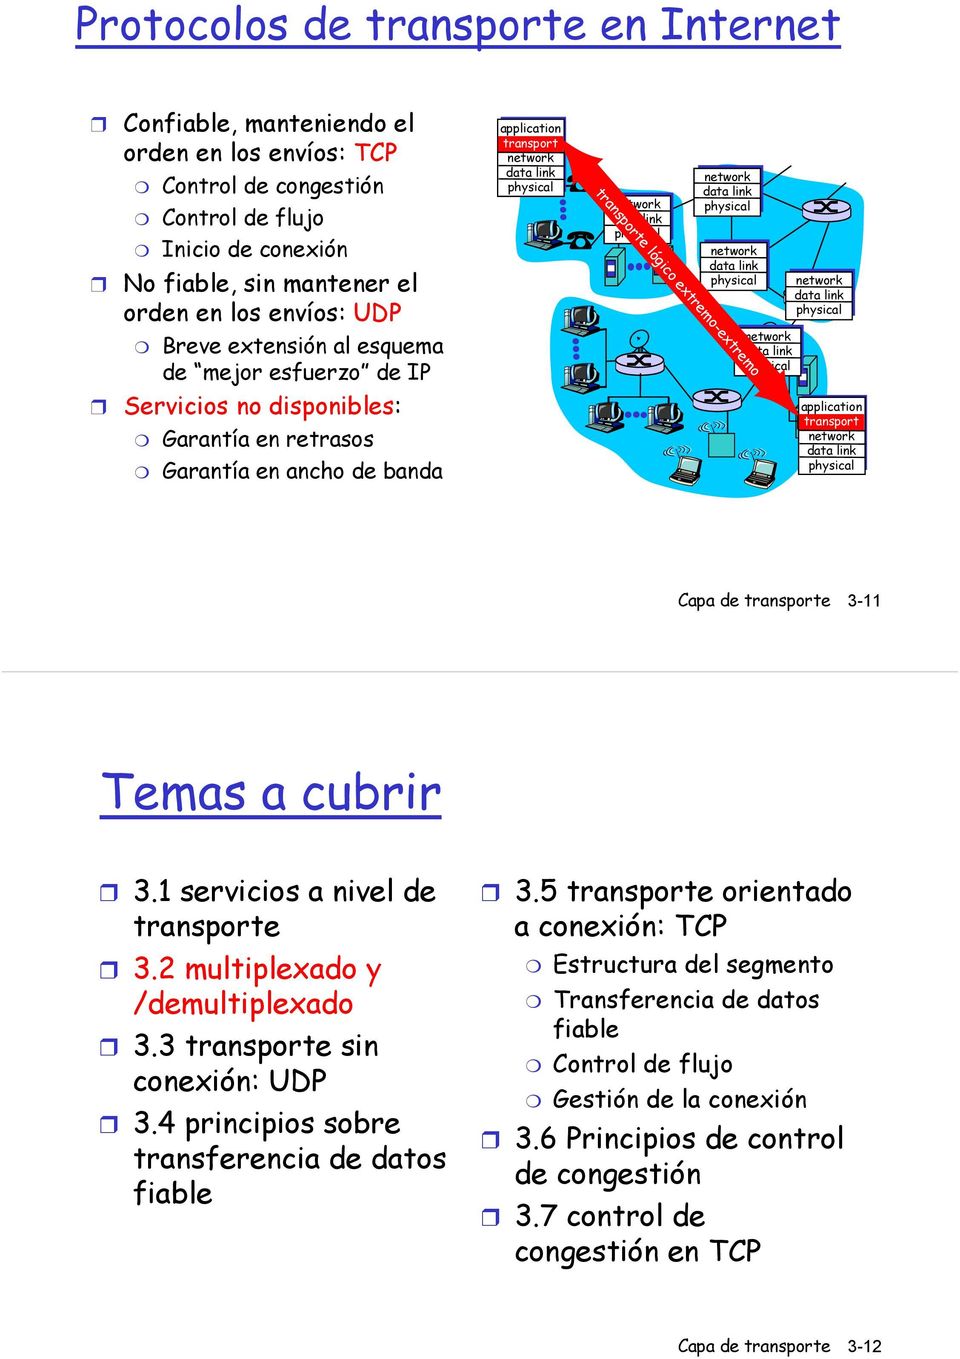 physical network data link physical transporte lógico extremo-extremo network data link physical network data link physical network data link physical application transport network data link physical